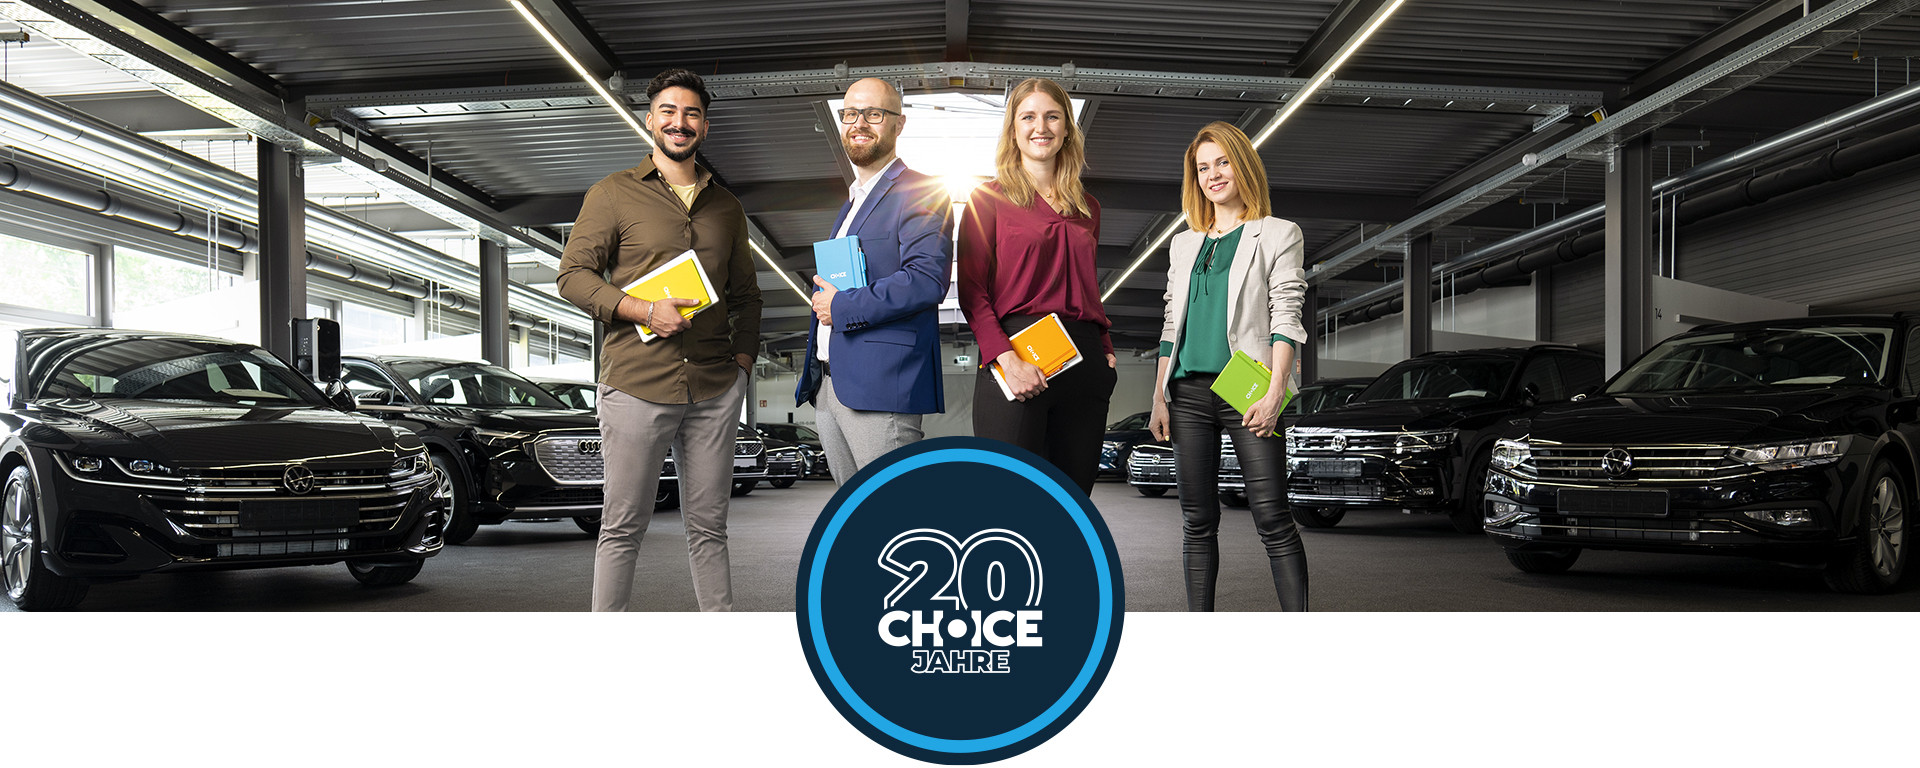 Employees of Choice in front of car pool